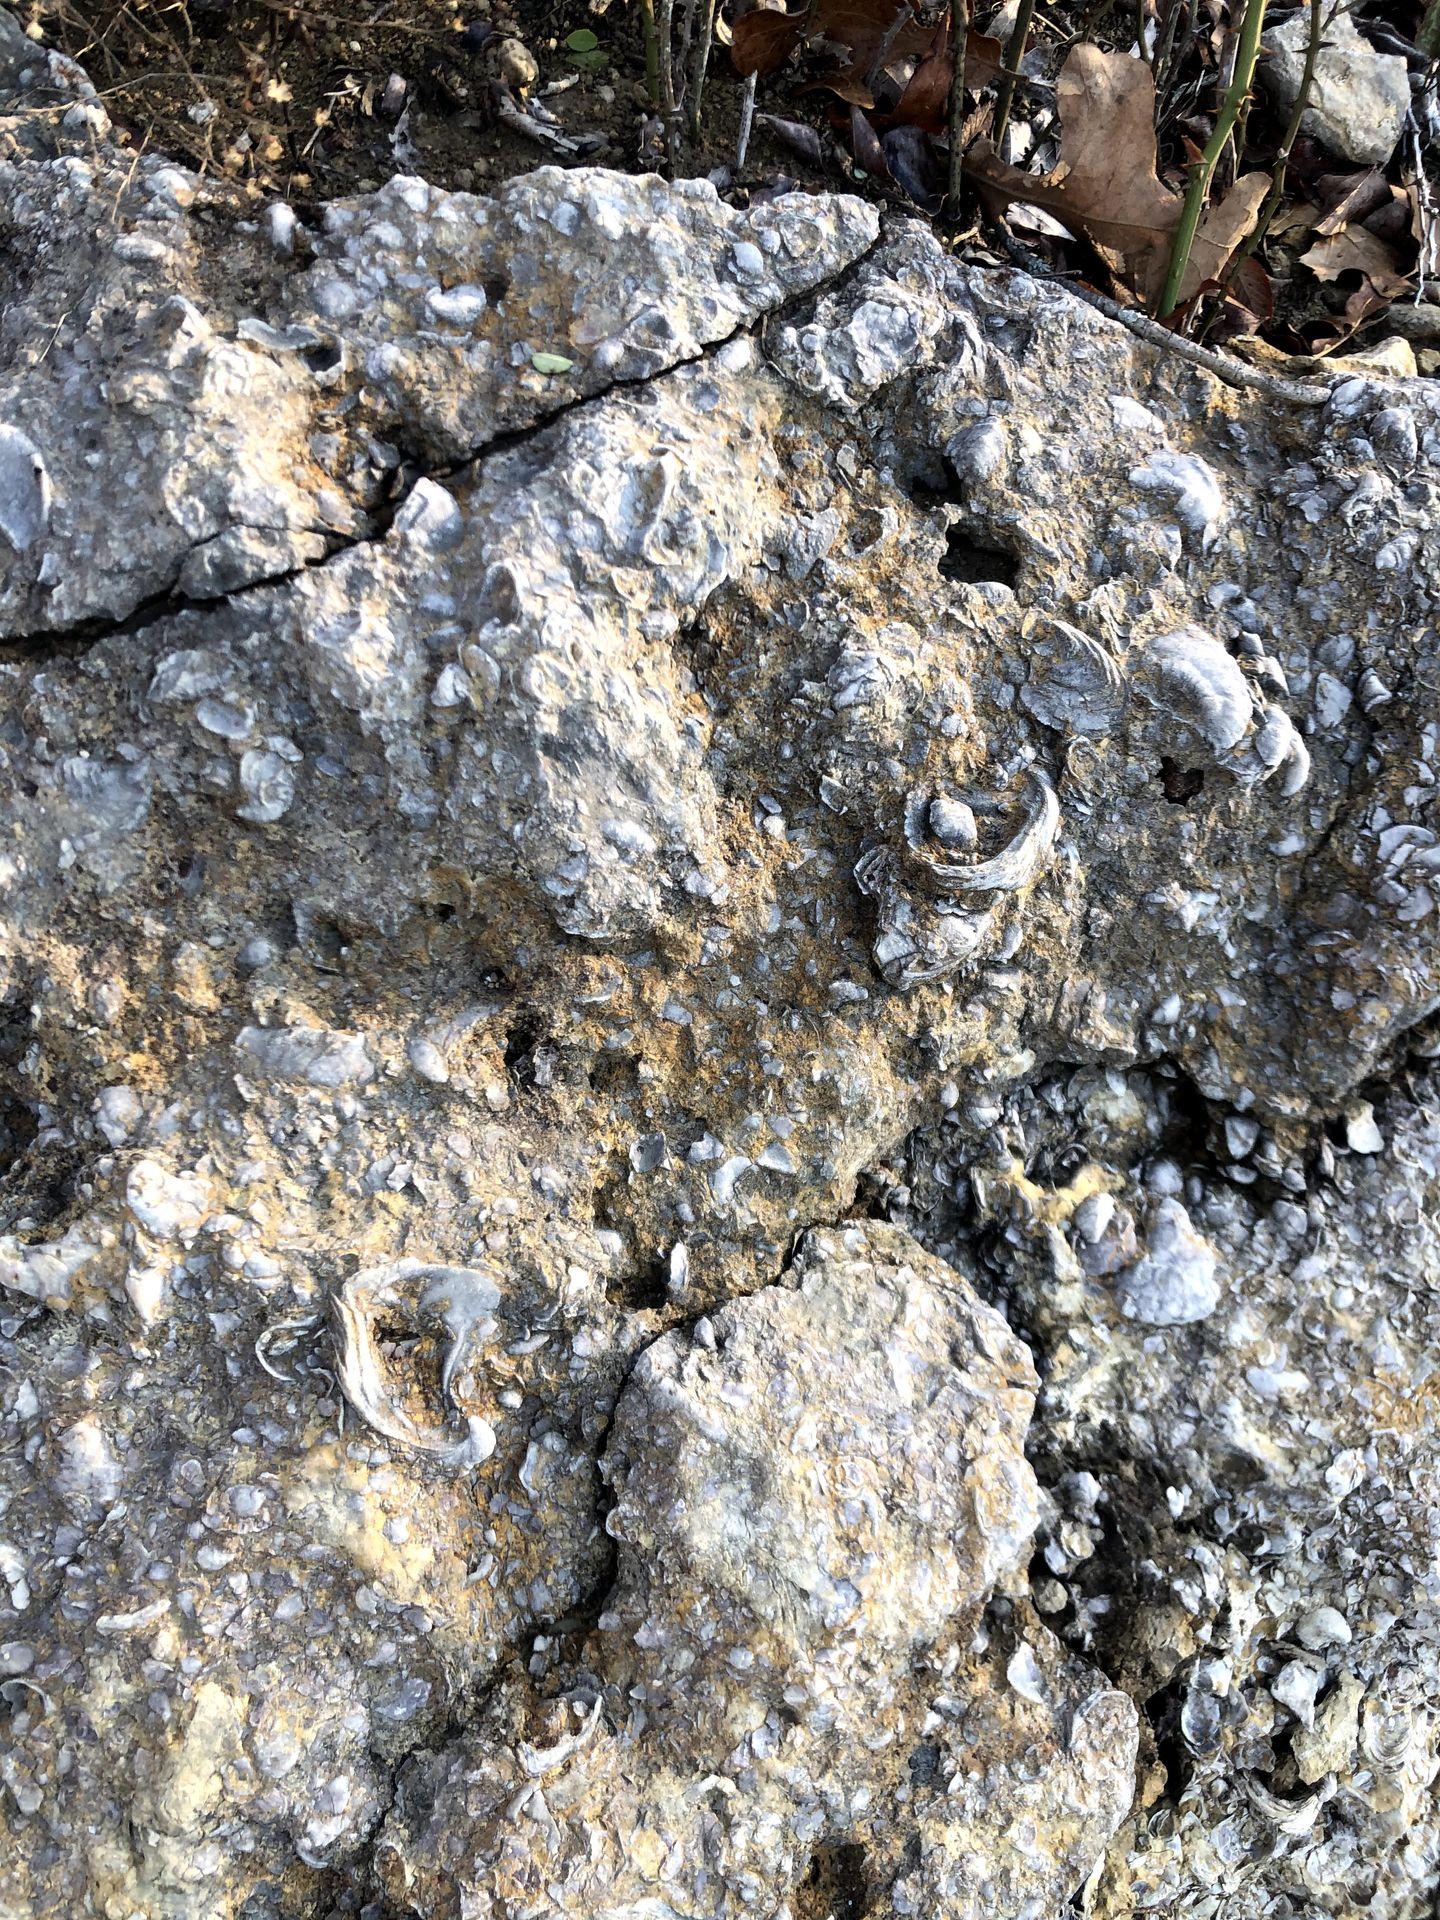 A close up of fossilized rocks at Eisenhower State Park